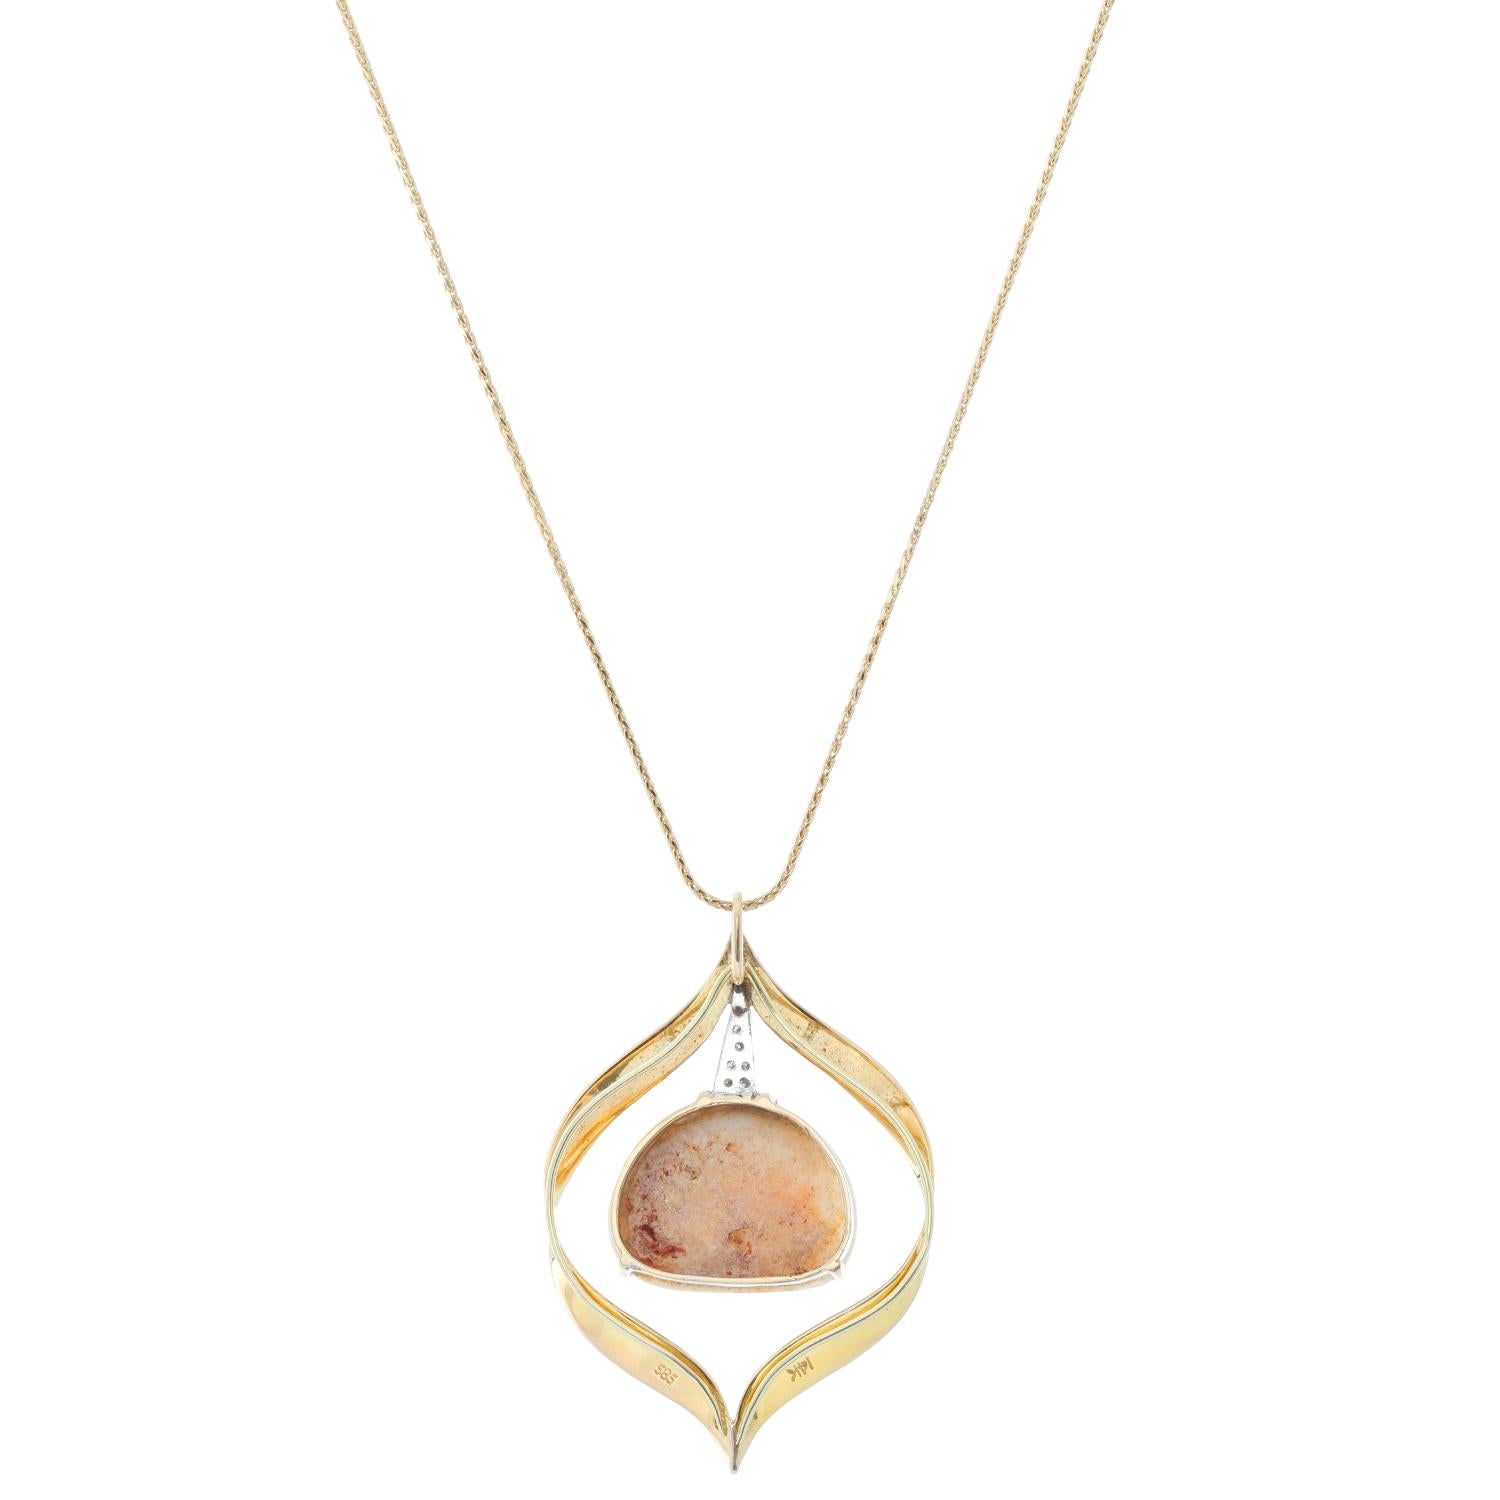 Opal and Diamond 14K Yellow Gold Necklace & Pendant - Beautiful round brilliant cut diamonds on a leaf pendant. Diamond approx. .06 cts. with a floating white opal. Opal approx. 8 cts. Total weight 3.03 grams.Total length 11 3/4 inches.